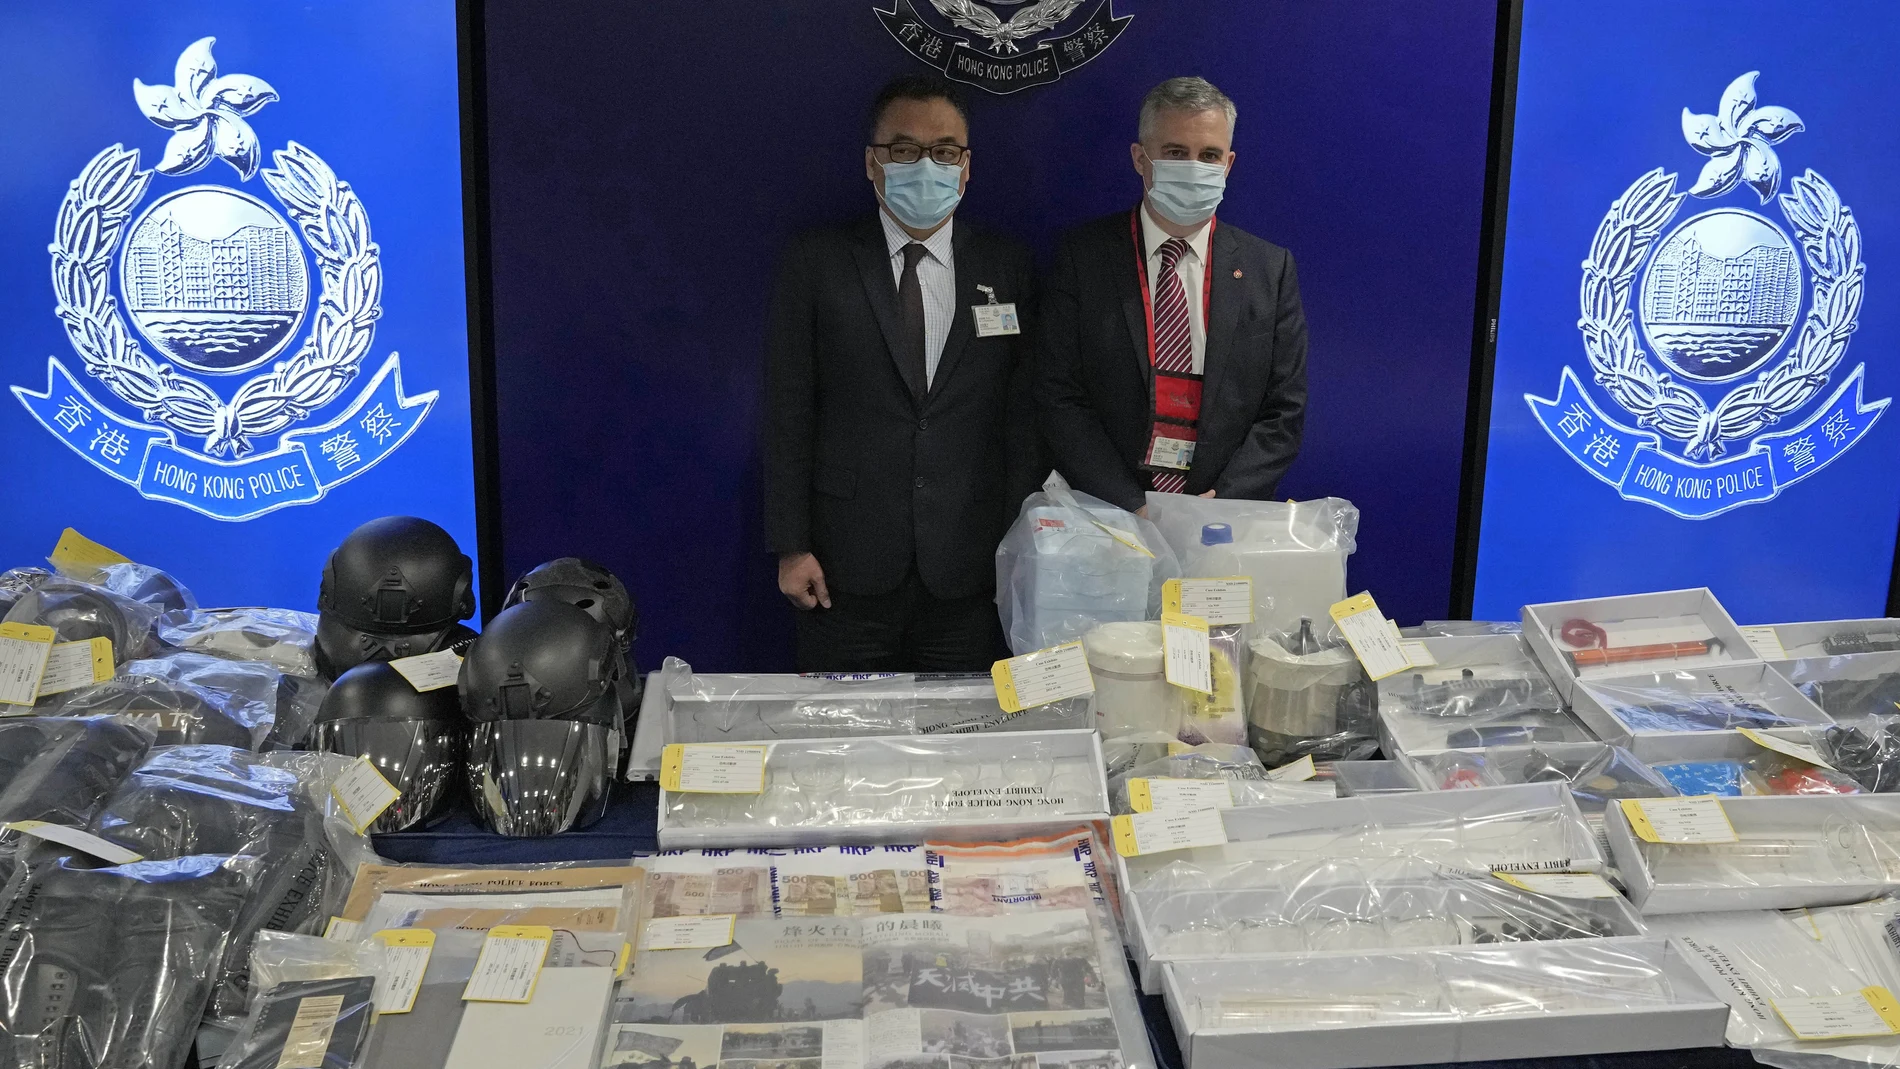 Senior Superintendent Li Kwai-wah, left, of Hong Kong Police National Security Department, and senior bomb disposal officer Alick McWhirter, right of Explosive Ordnance Disposal Bureau, pose with the confiscated evidence during a news conference as nine people were arrested over the alleged plot to plant bombs around Hong Kong, at the police headquarters in Hong Kong, Tuesday, July 6, 2021.(AP Photo/Kin Cheung)